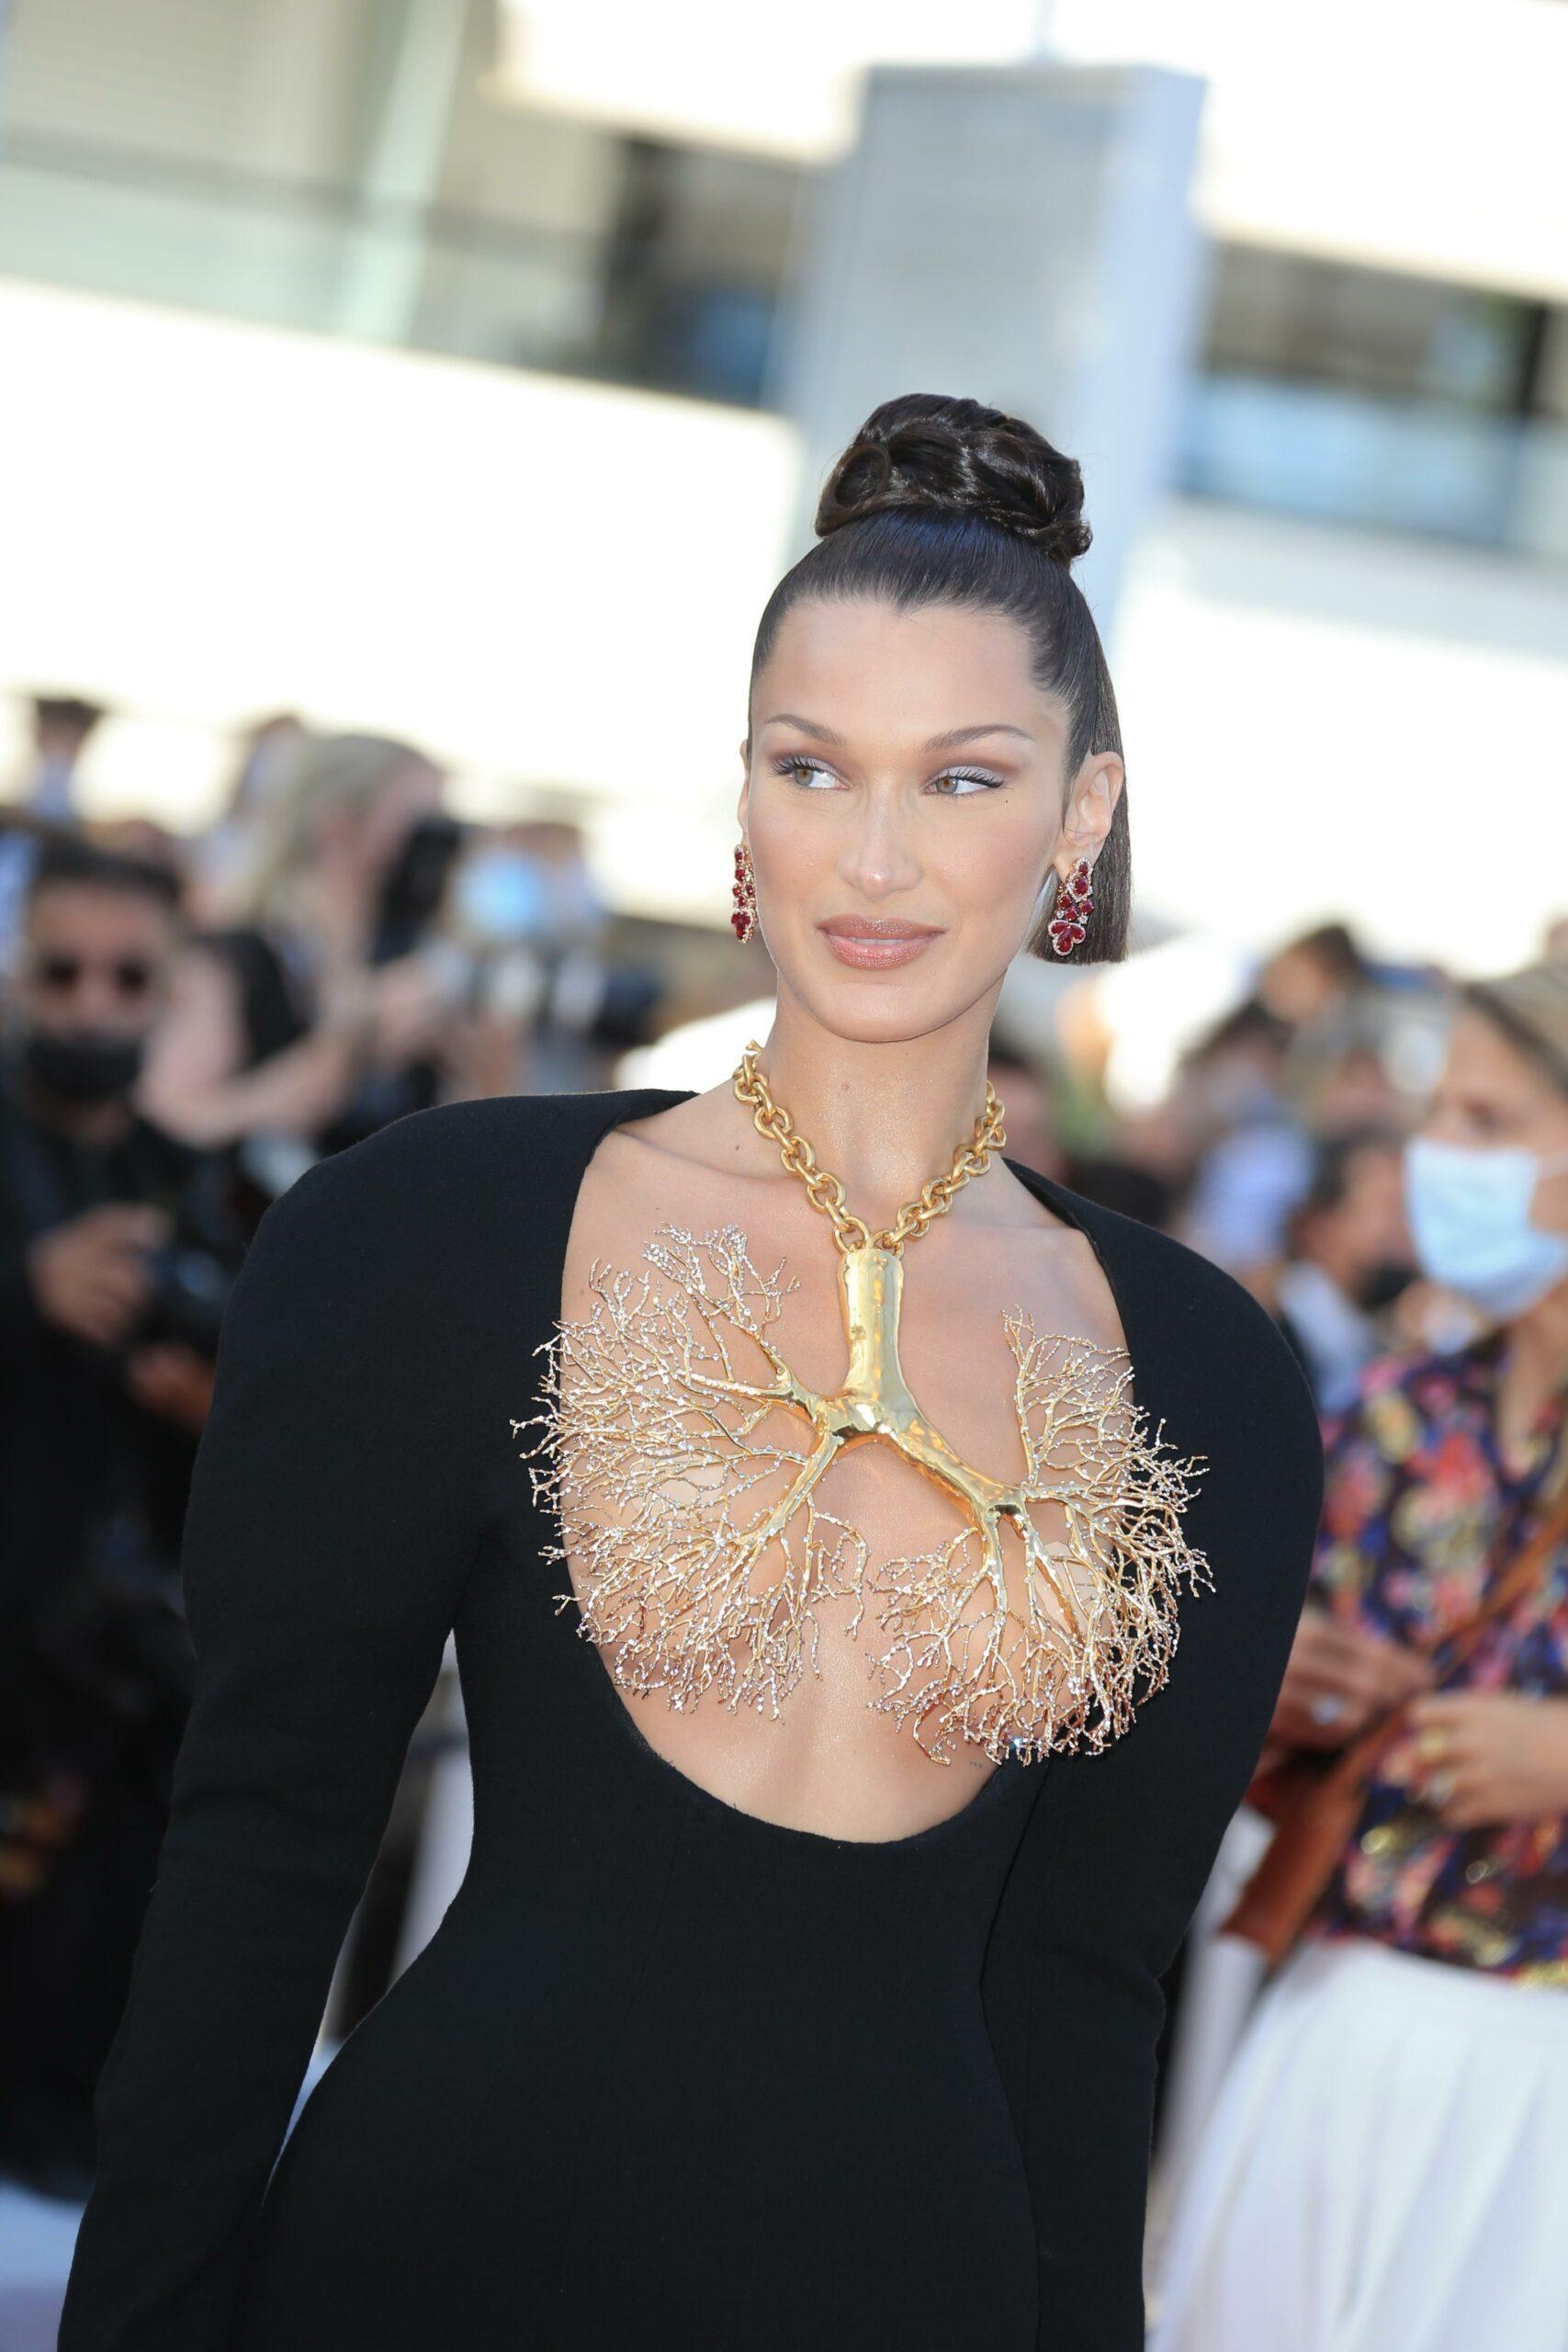 Bella Hadid at the TRE PIANI / THREE FLOORS " Red carpet the 74th Cannes Film Festival at Palais des Festival